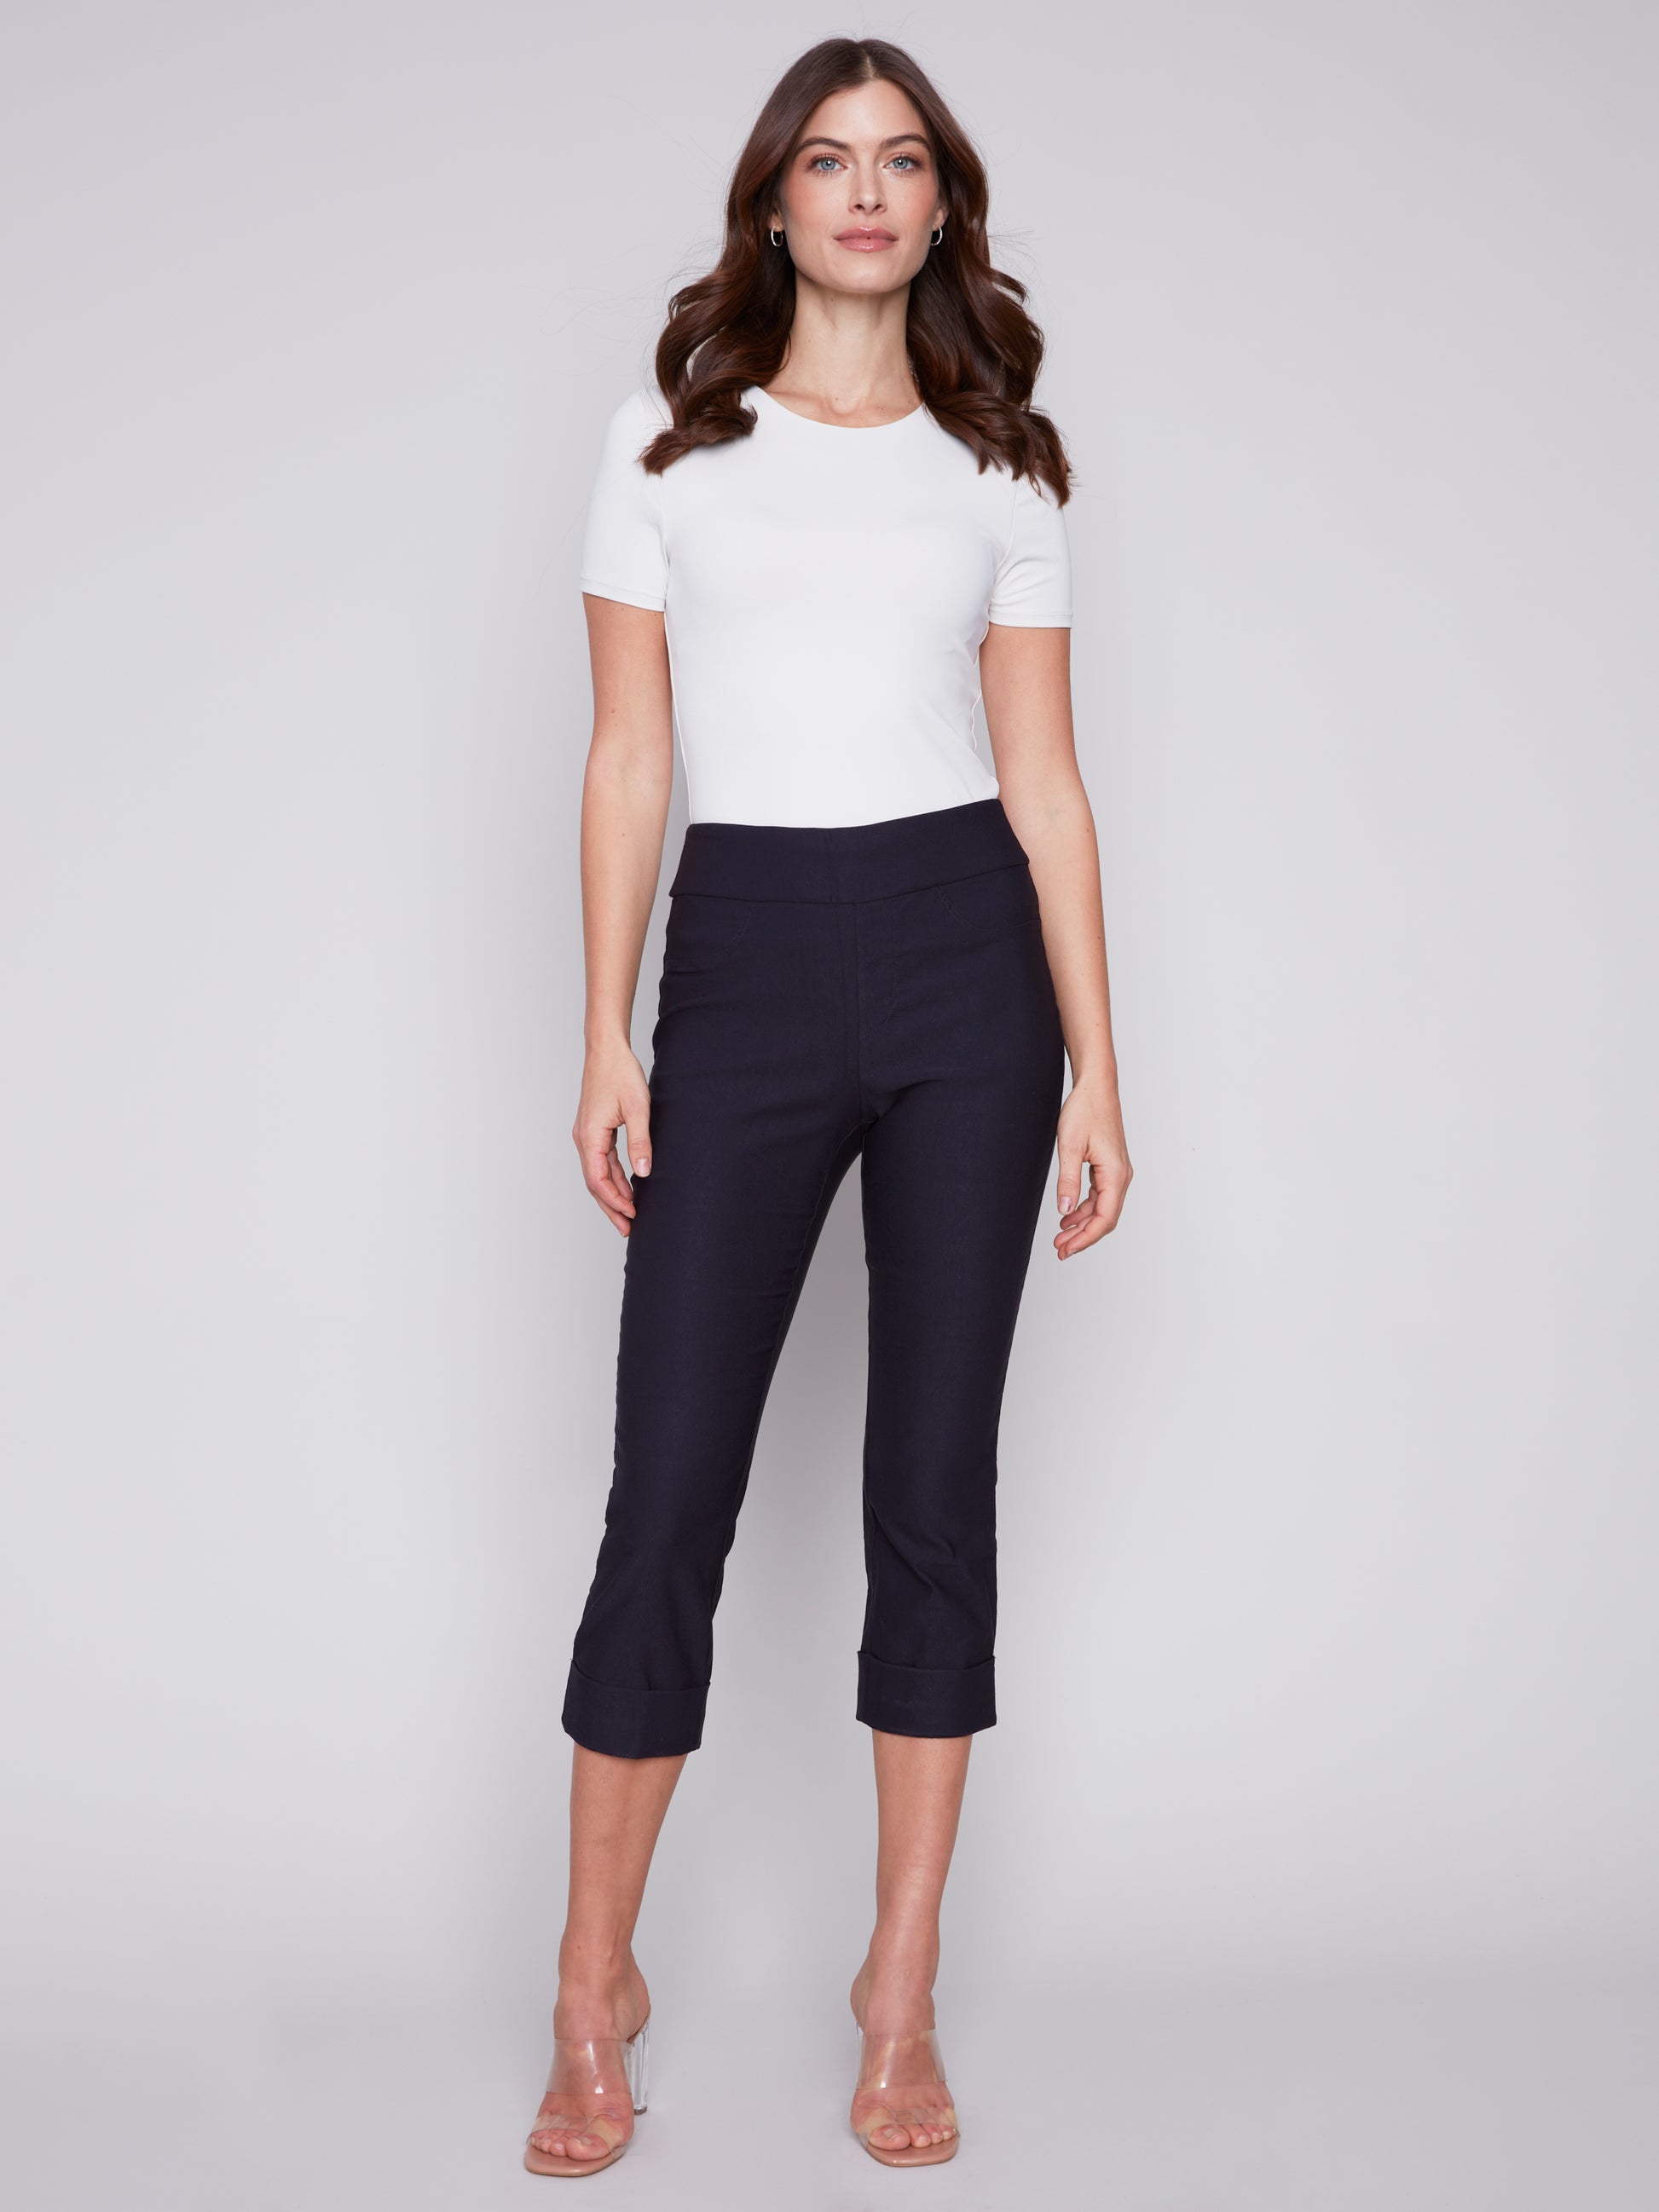 A woman showcasing her stylish Charlie B Stretch Pull-on Capri pants paired with a simple white t-shirt, perfectly balancing style and functionality.